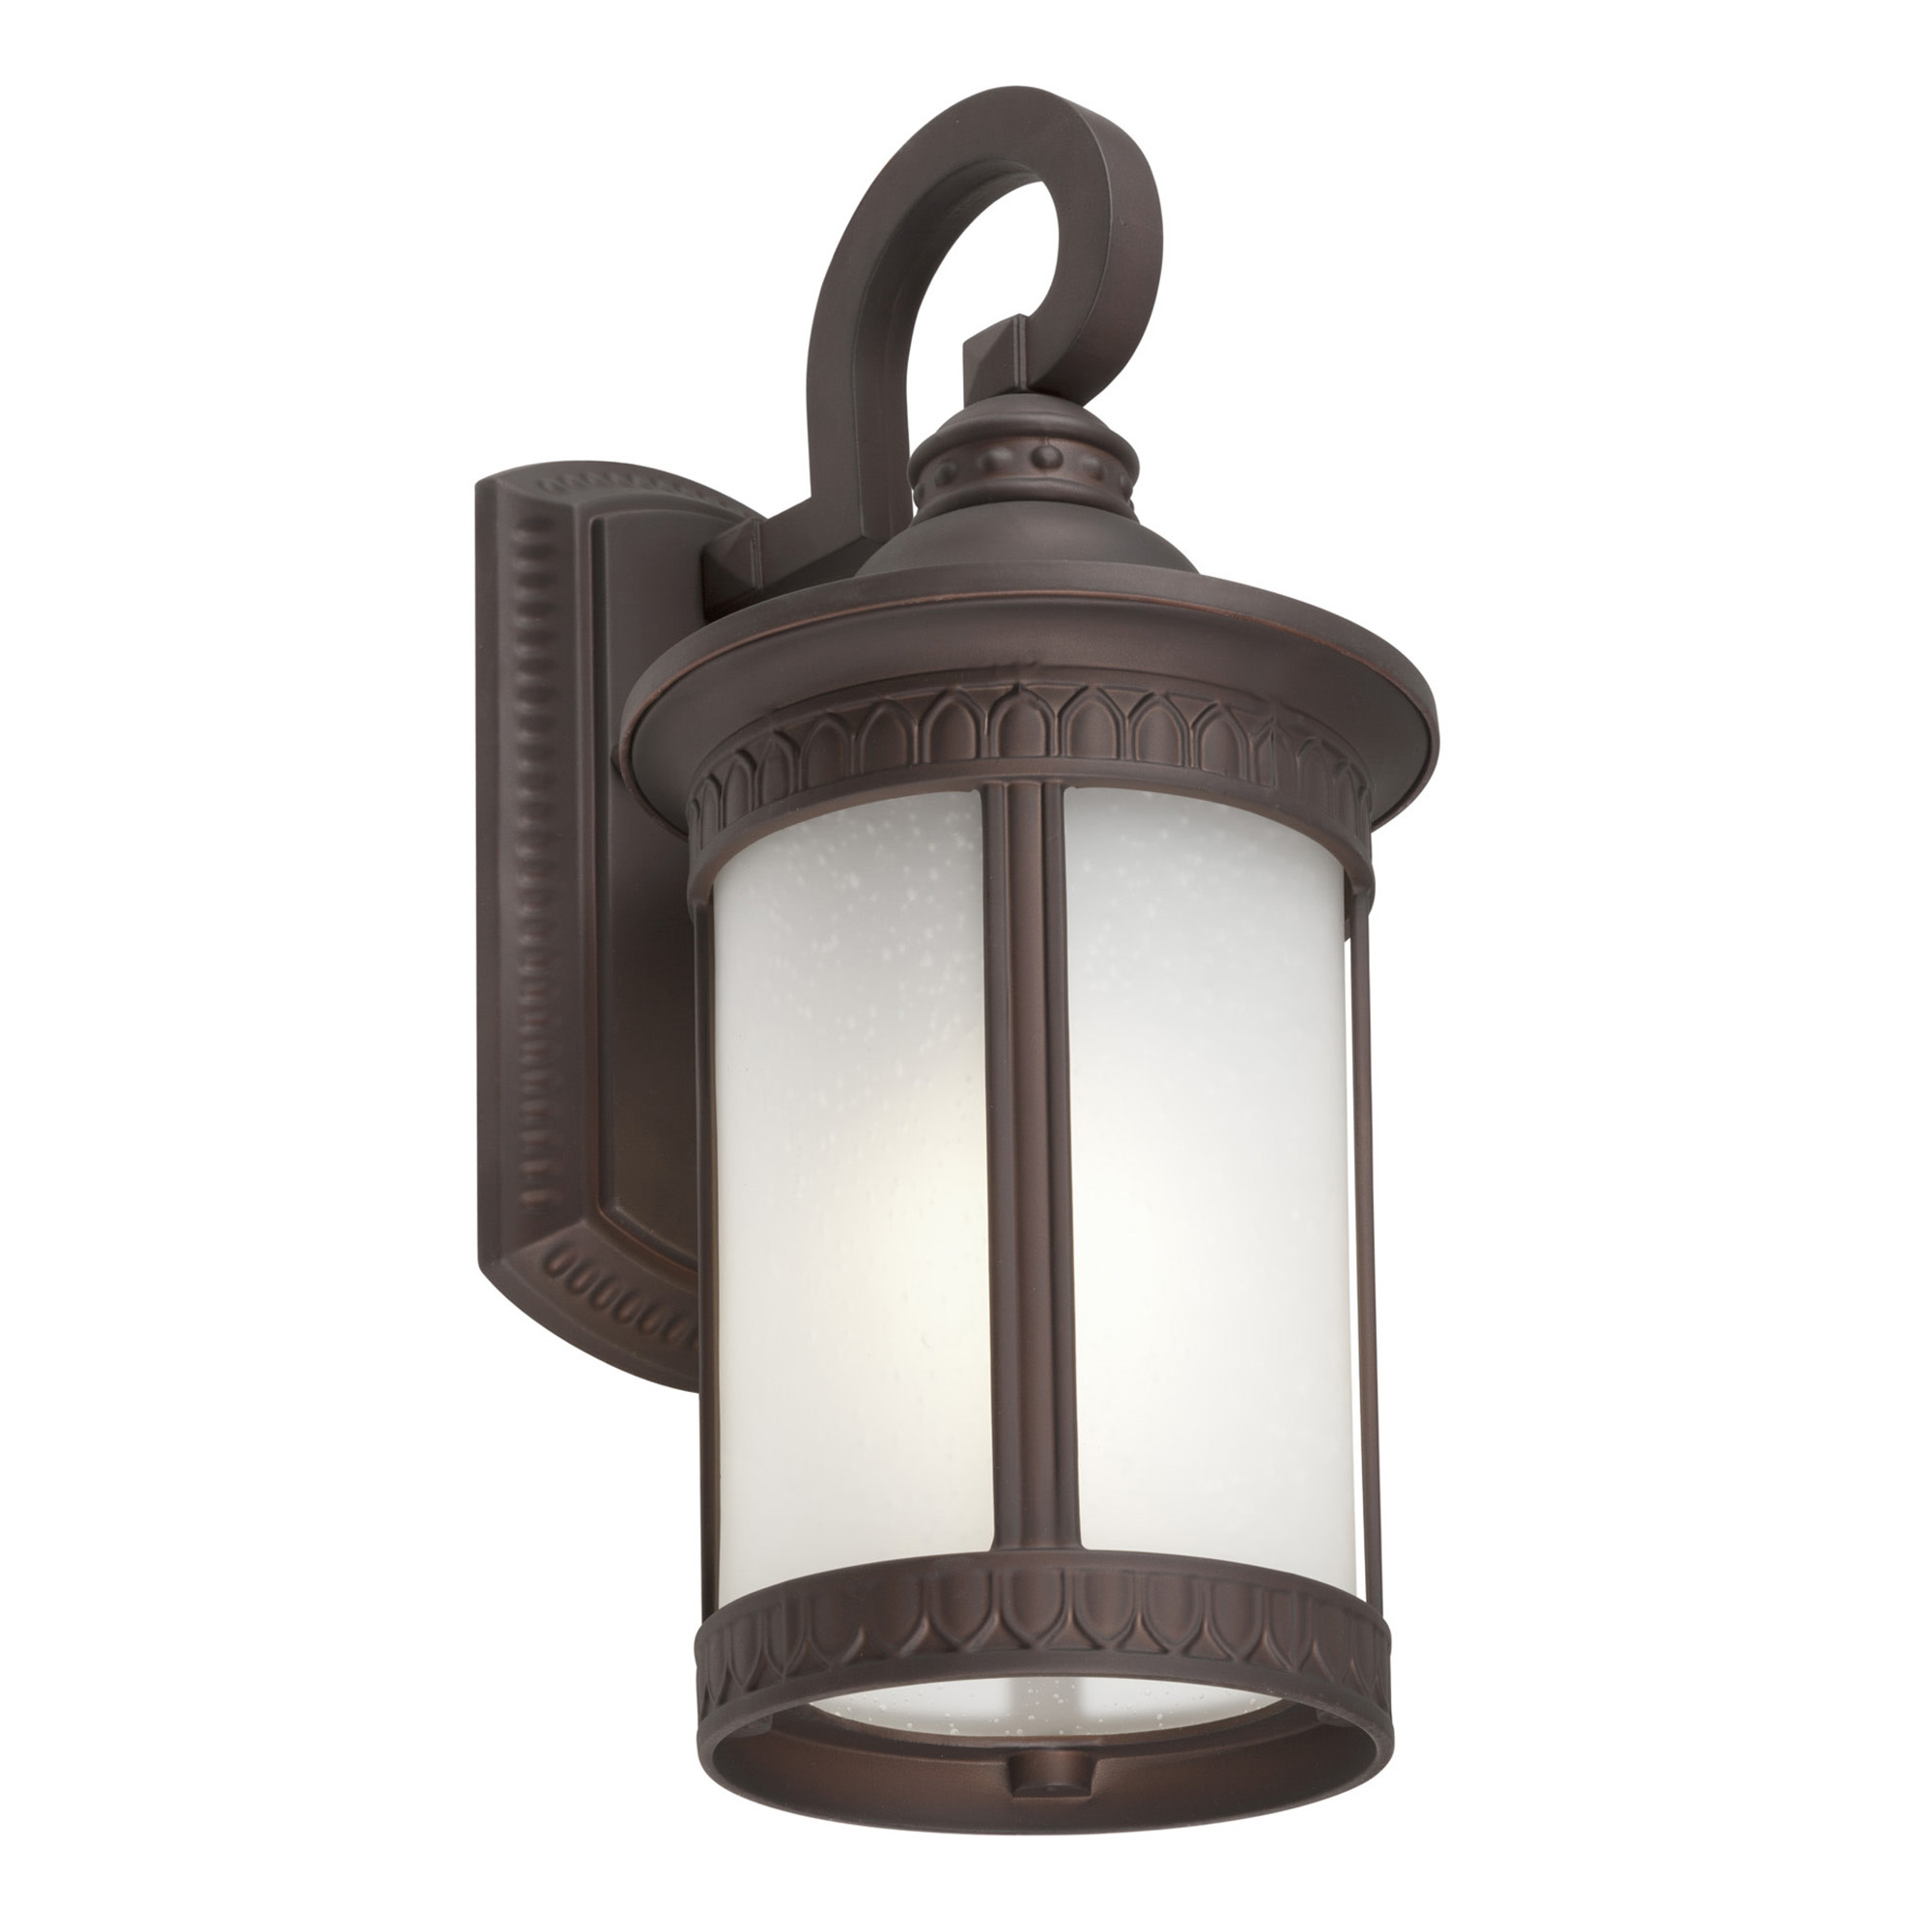 Forte Lighting 17022-01 1 Light 16" Tall Outdoor Wall Sconce - Painted Rust - image 2 of 3